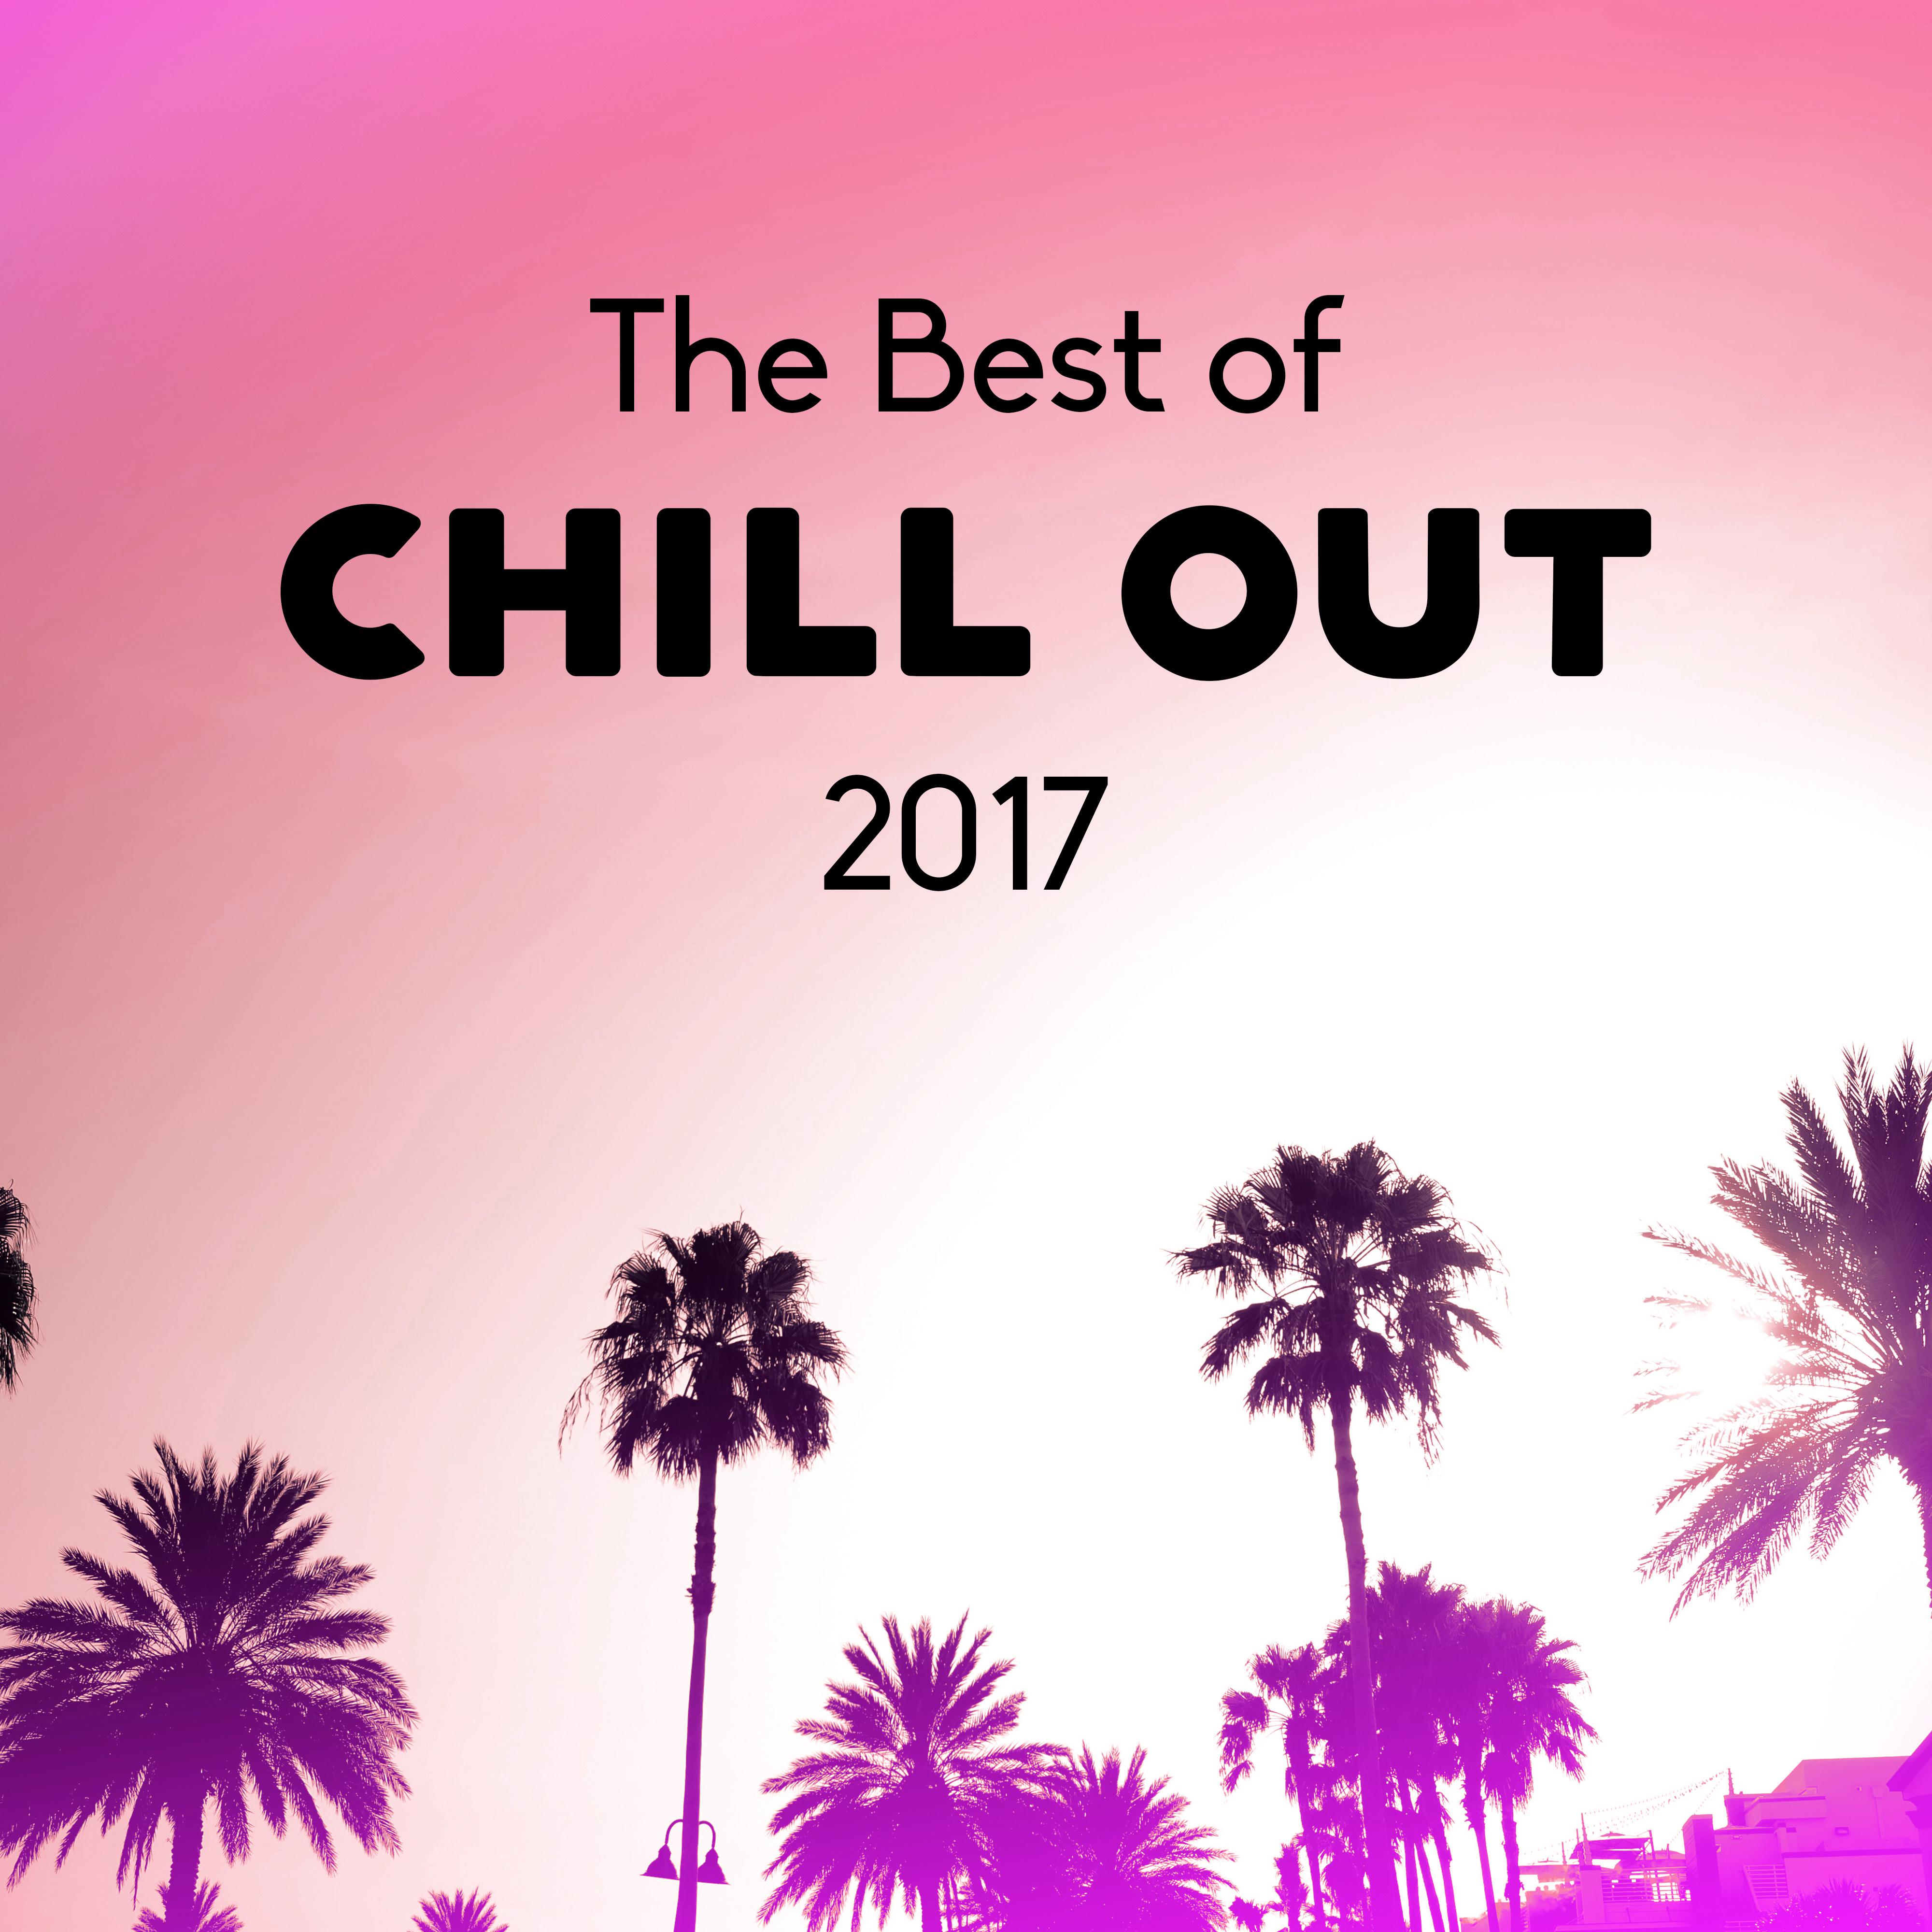 The Best of Chill Out 2017 -  Summer Lounge, Chill Out Music, Party Hits, Dance Music, Beach House